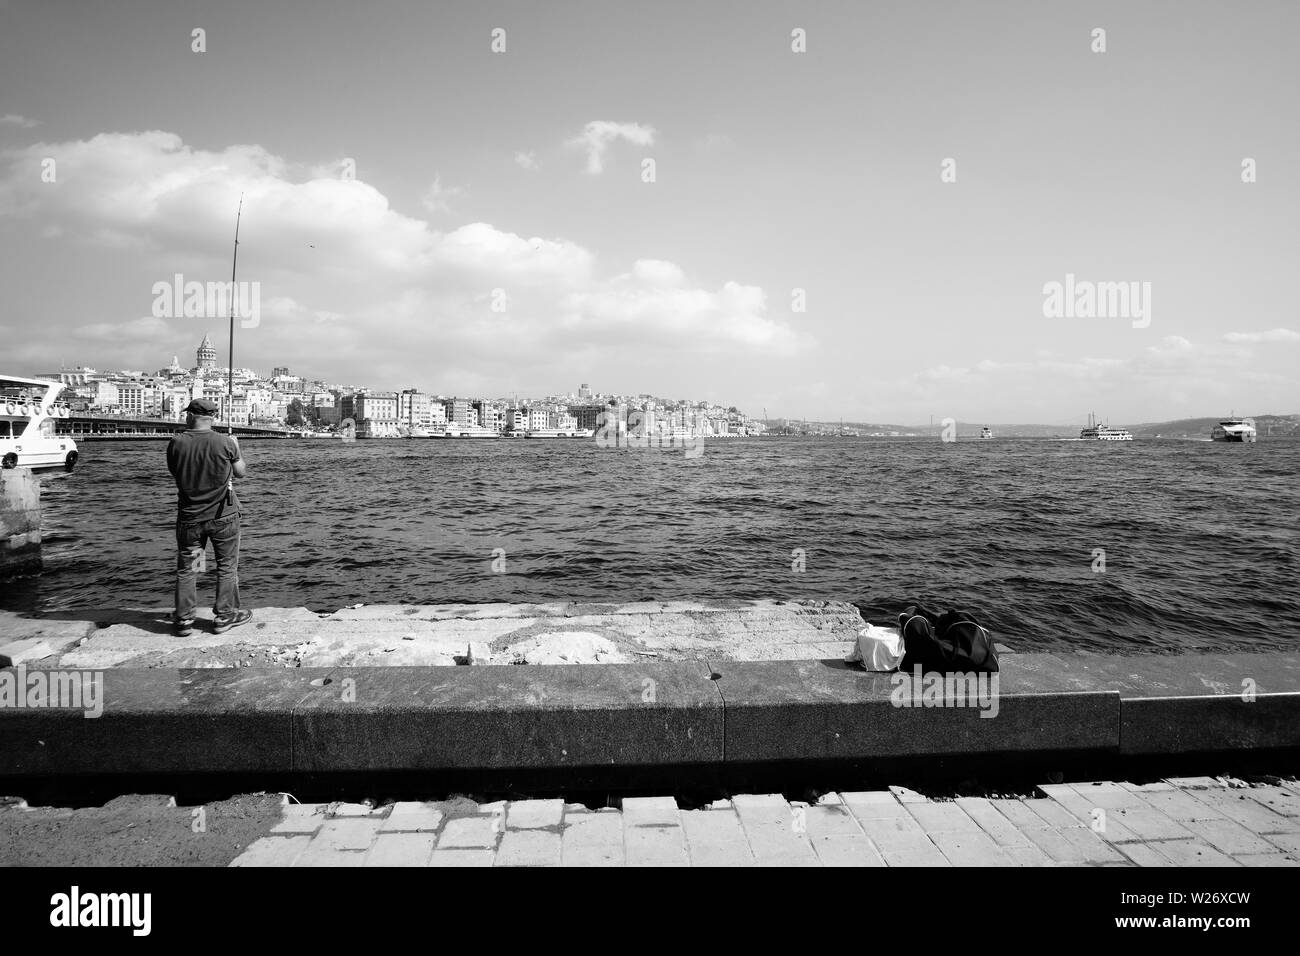 Istanbul, Turkey- September 21, 2017:Fisherman on the quay, with the famous Galata tower in the distance Stock Photo